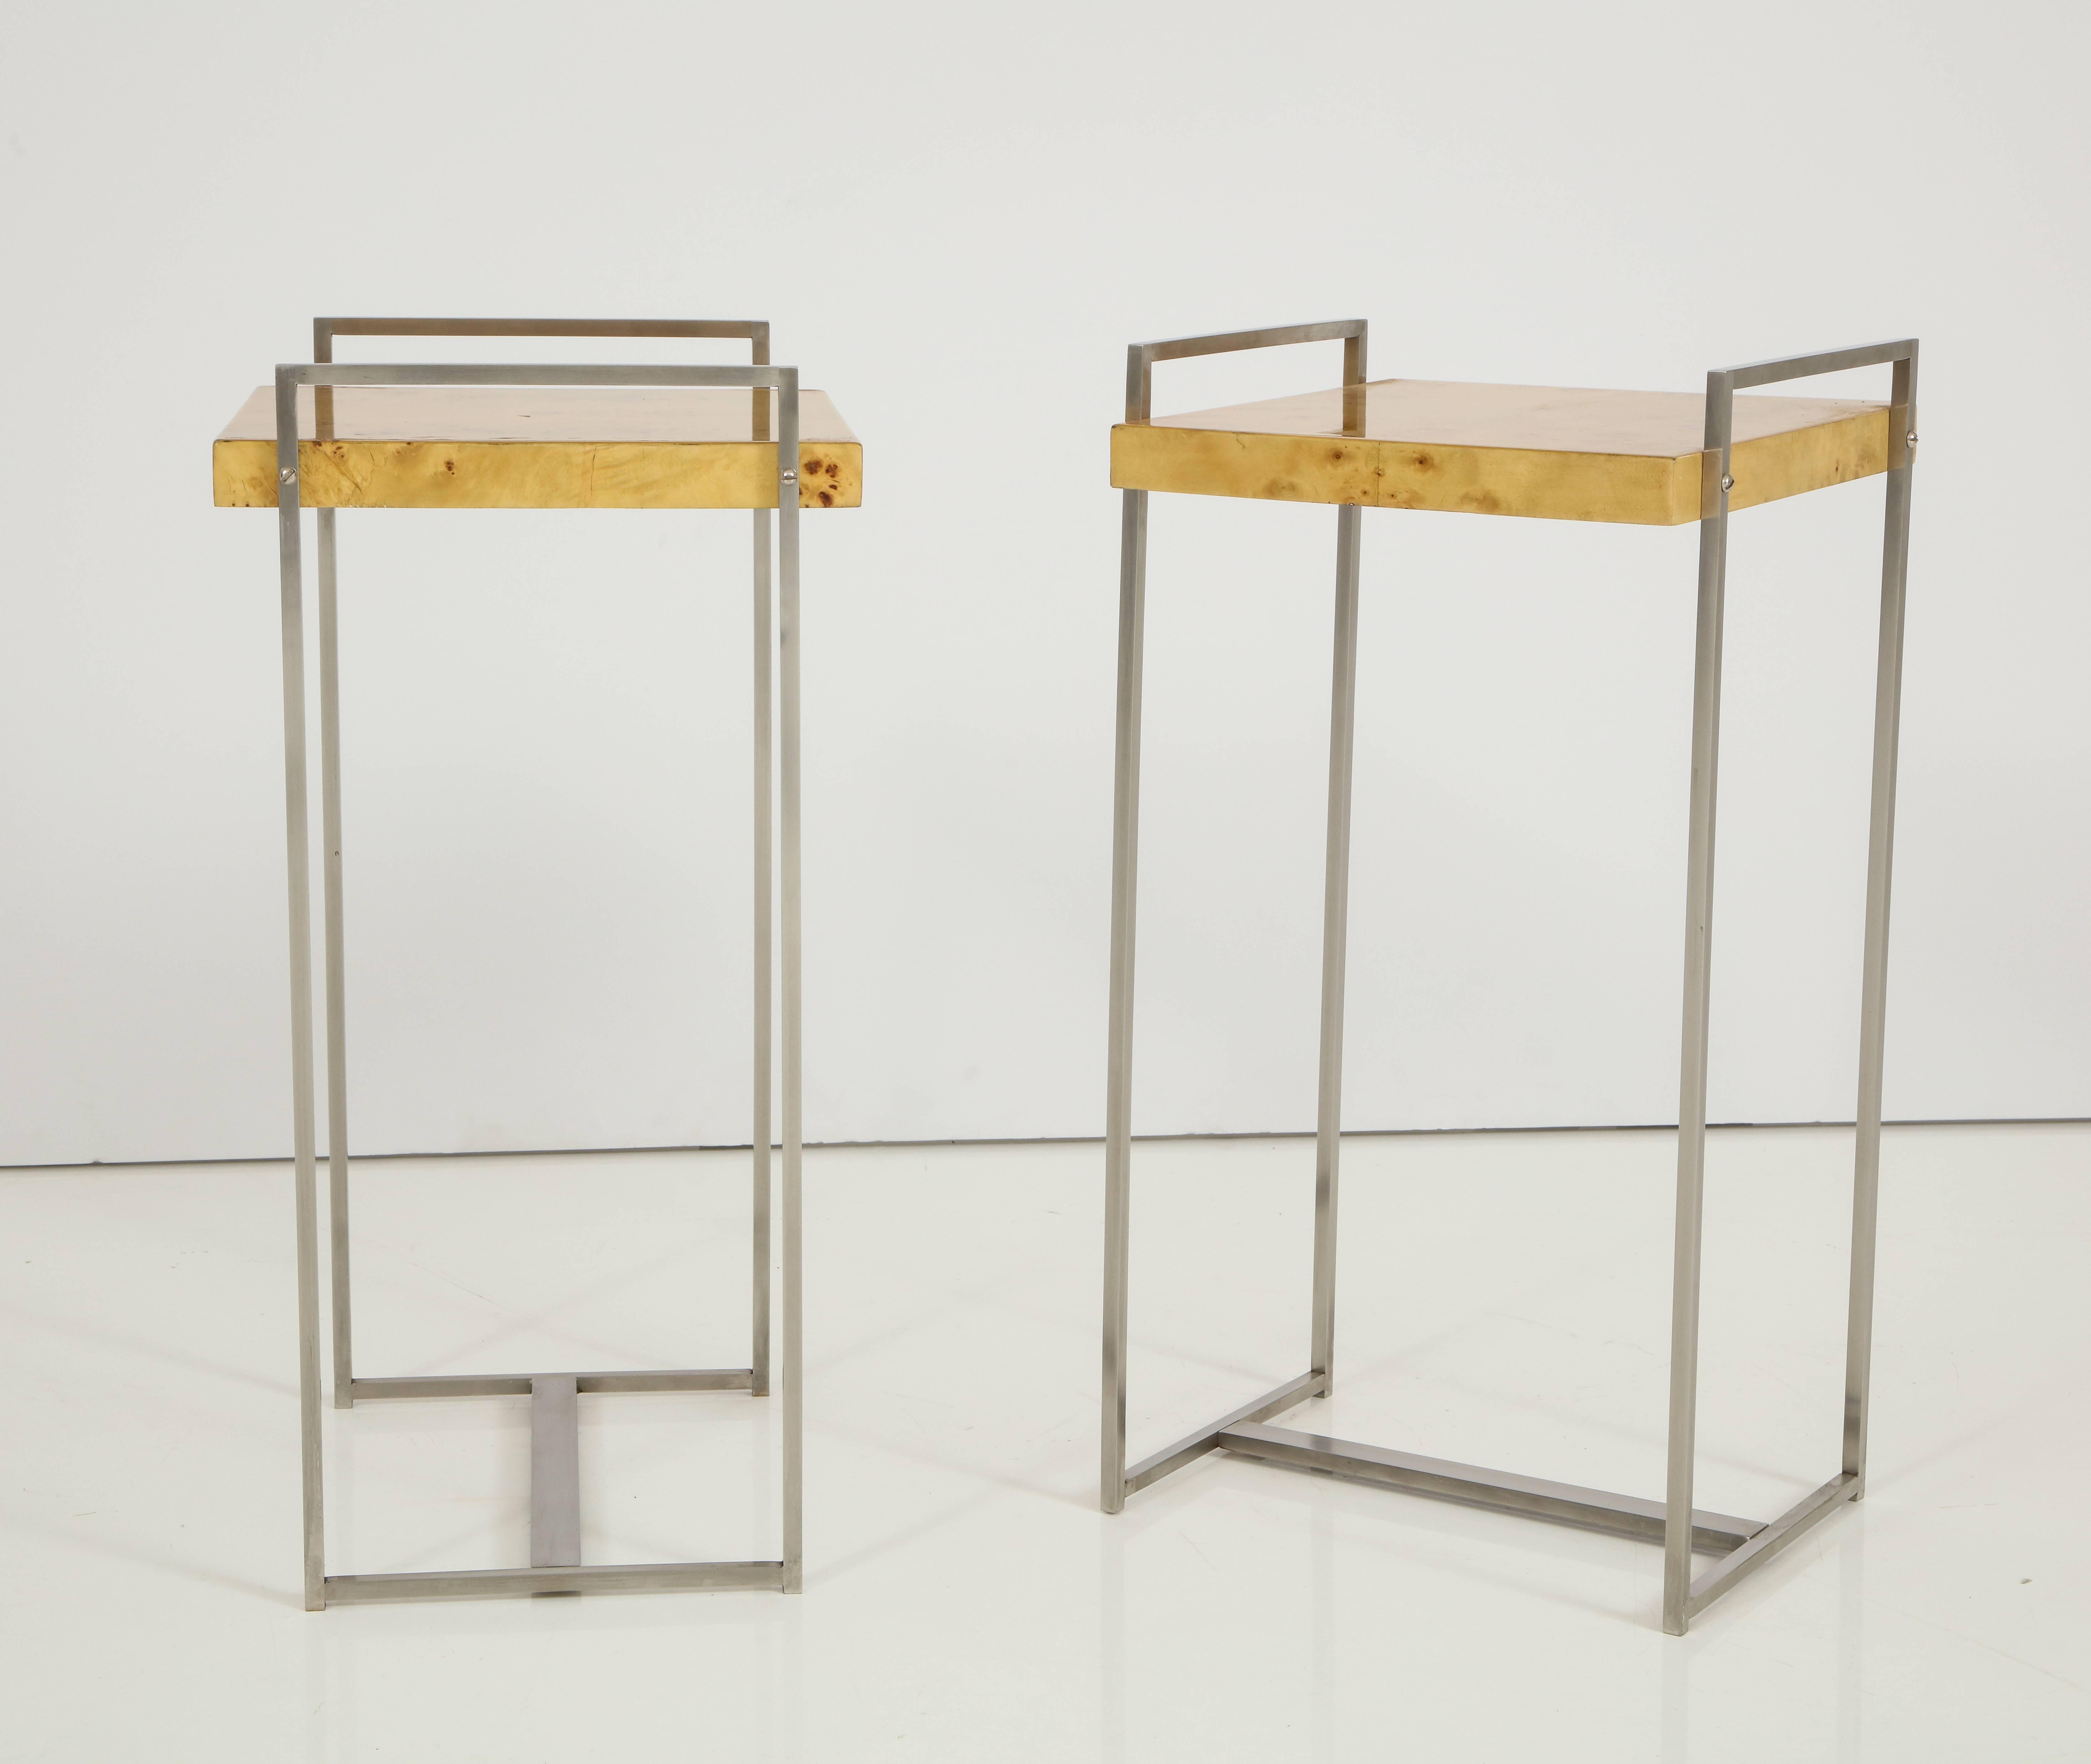 American Pair of Steel Side Tables or End Tables with Birdseye Maple Tops